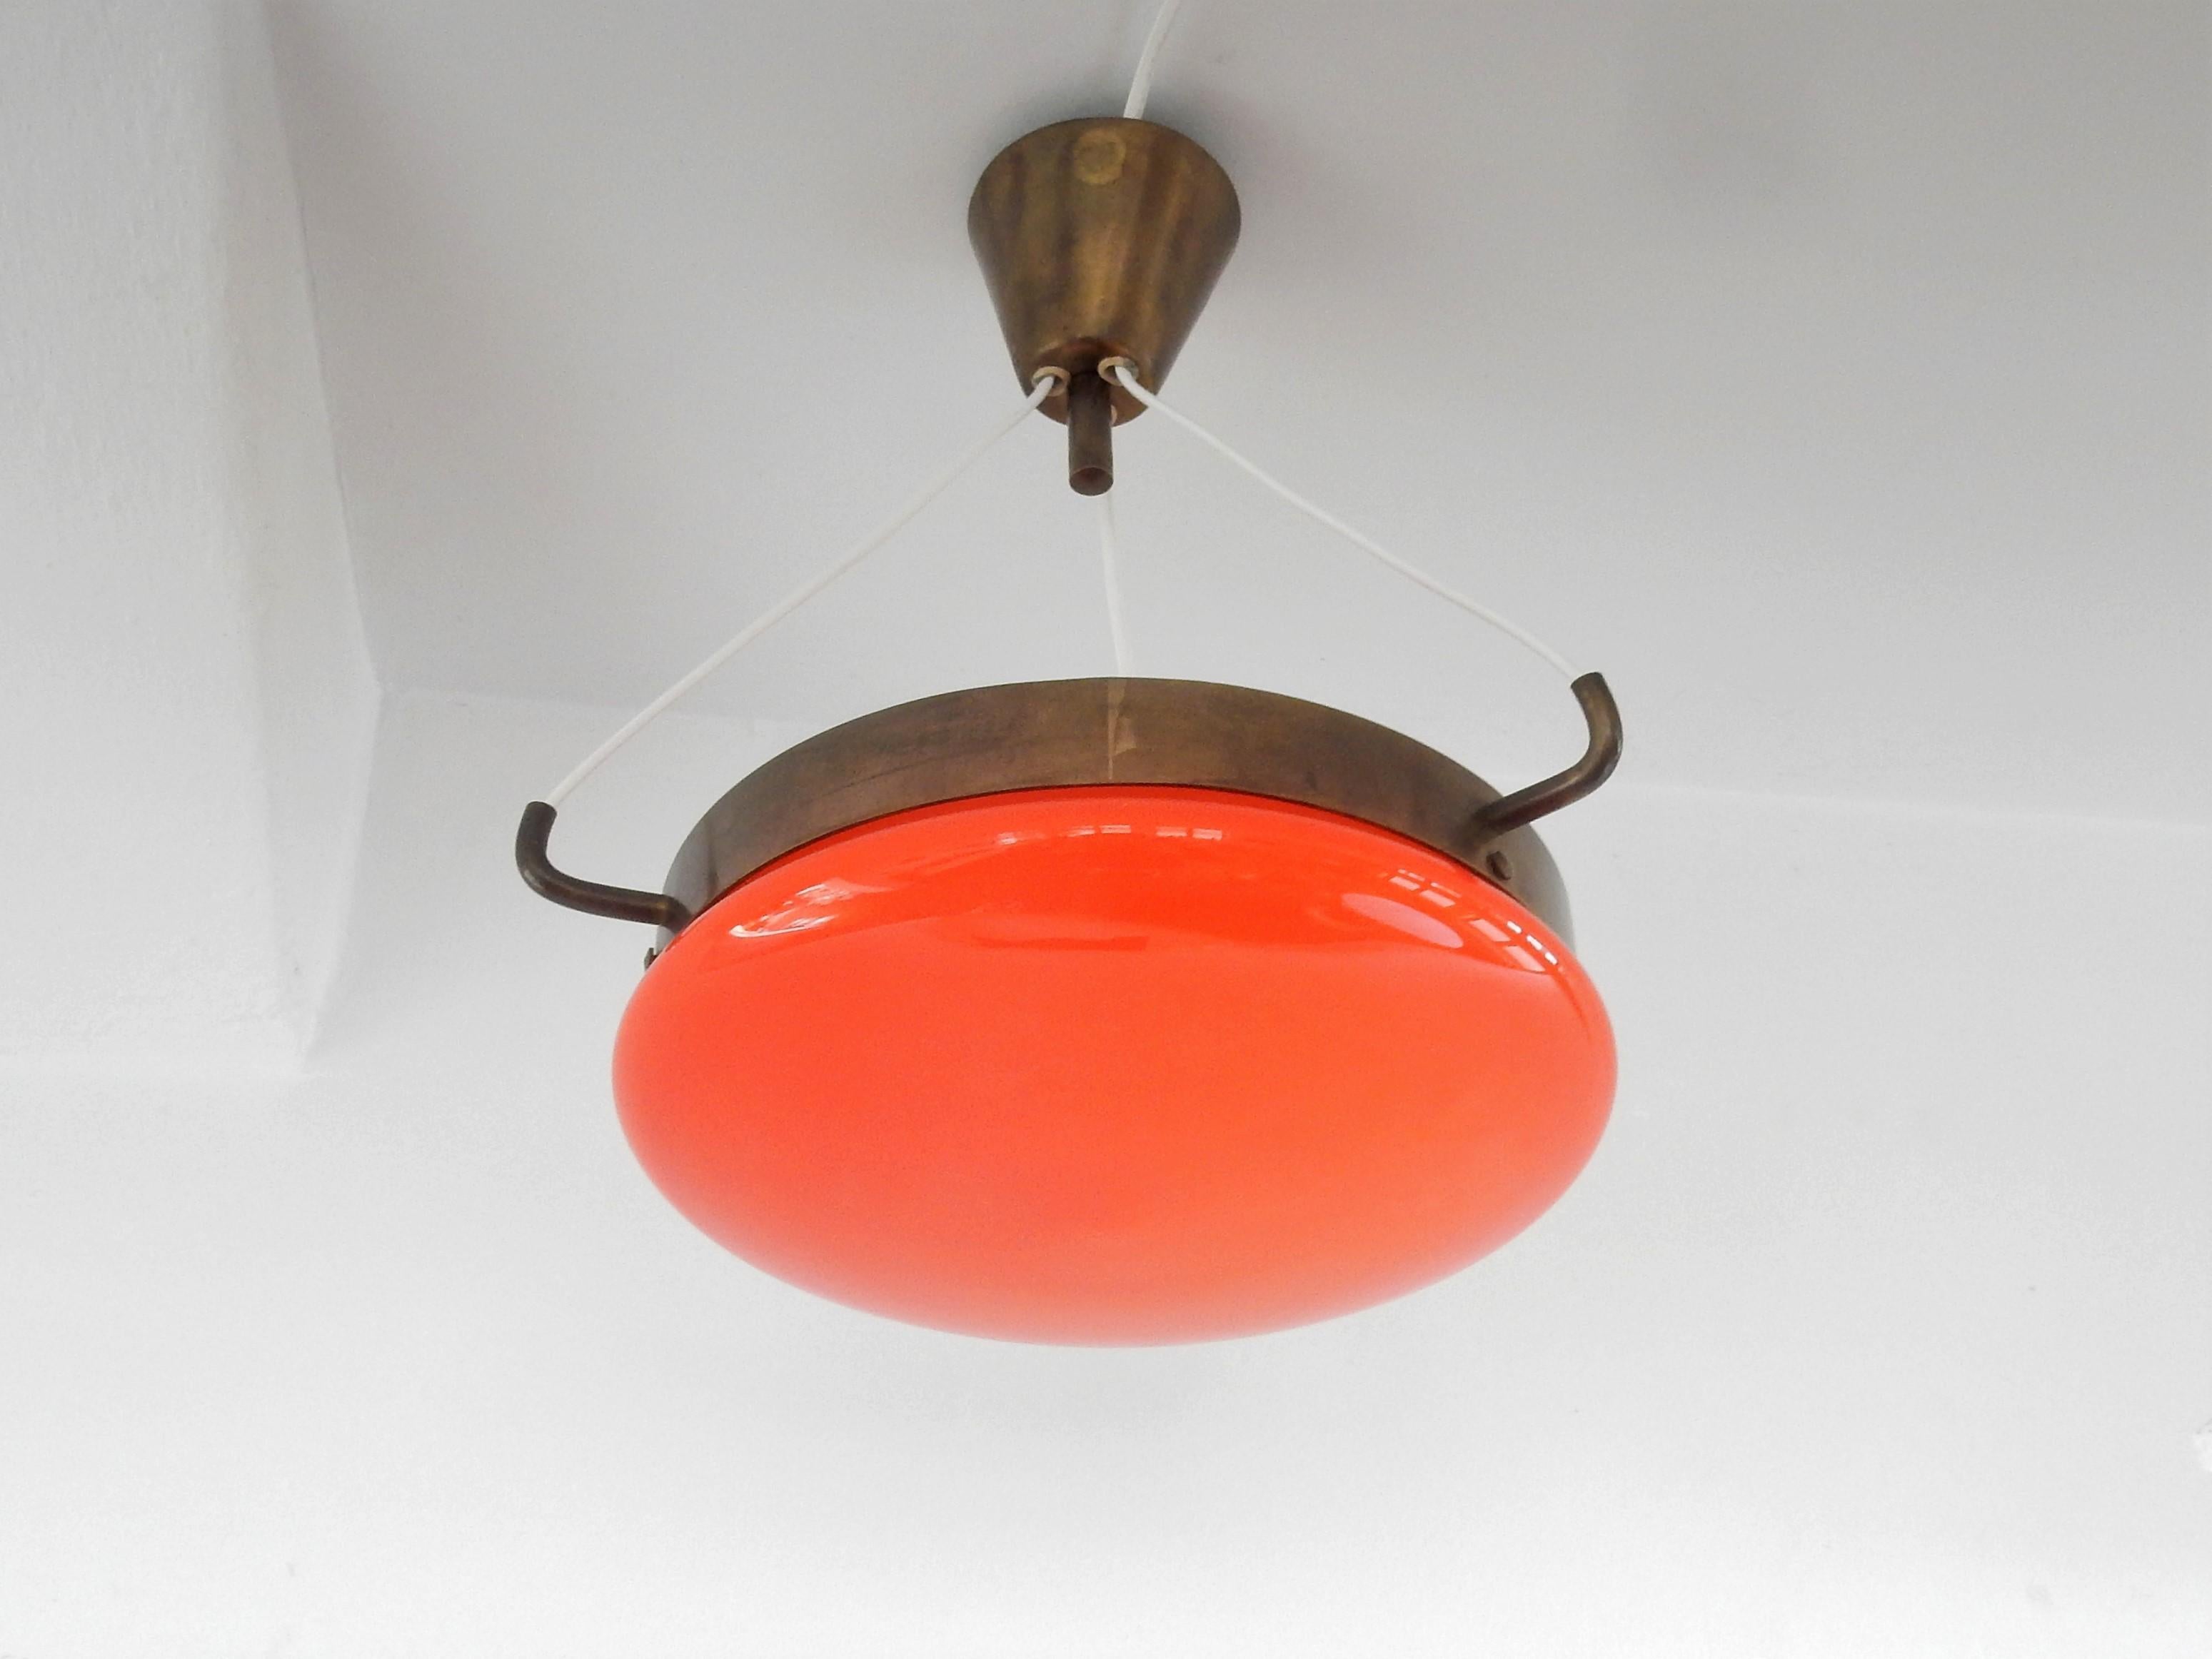 This elegant ceiling lamp is made of orange colored glass with a white inside and brass details. The glass is hung to the ceiling fixture by the brass ring with three attached wires. It gives a nice and warm light. The lamp is in a very good